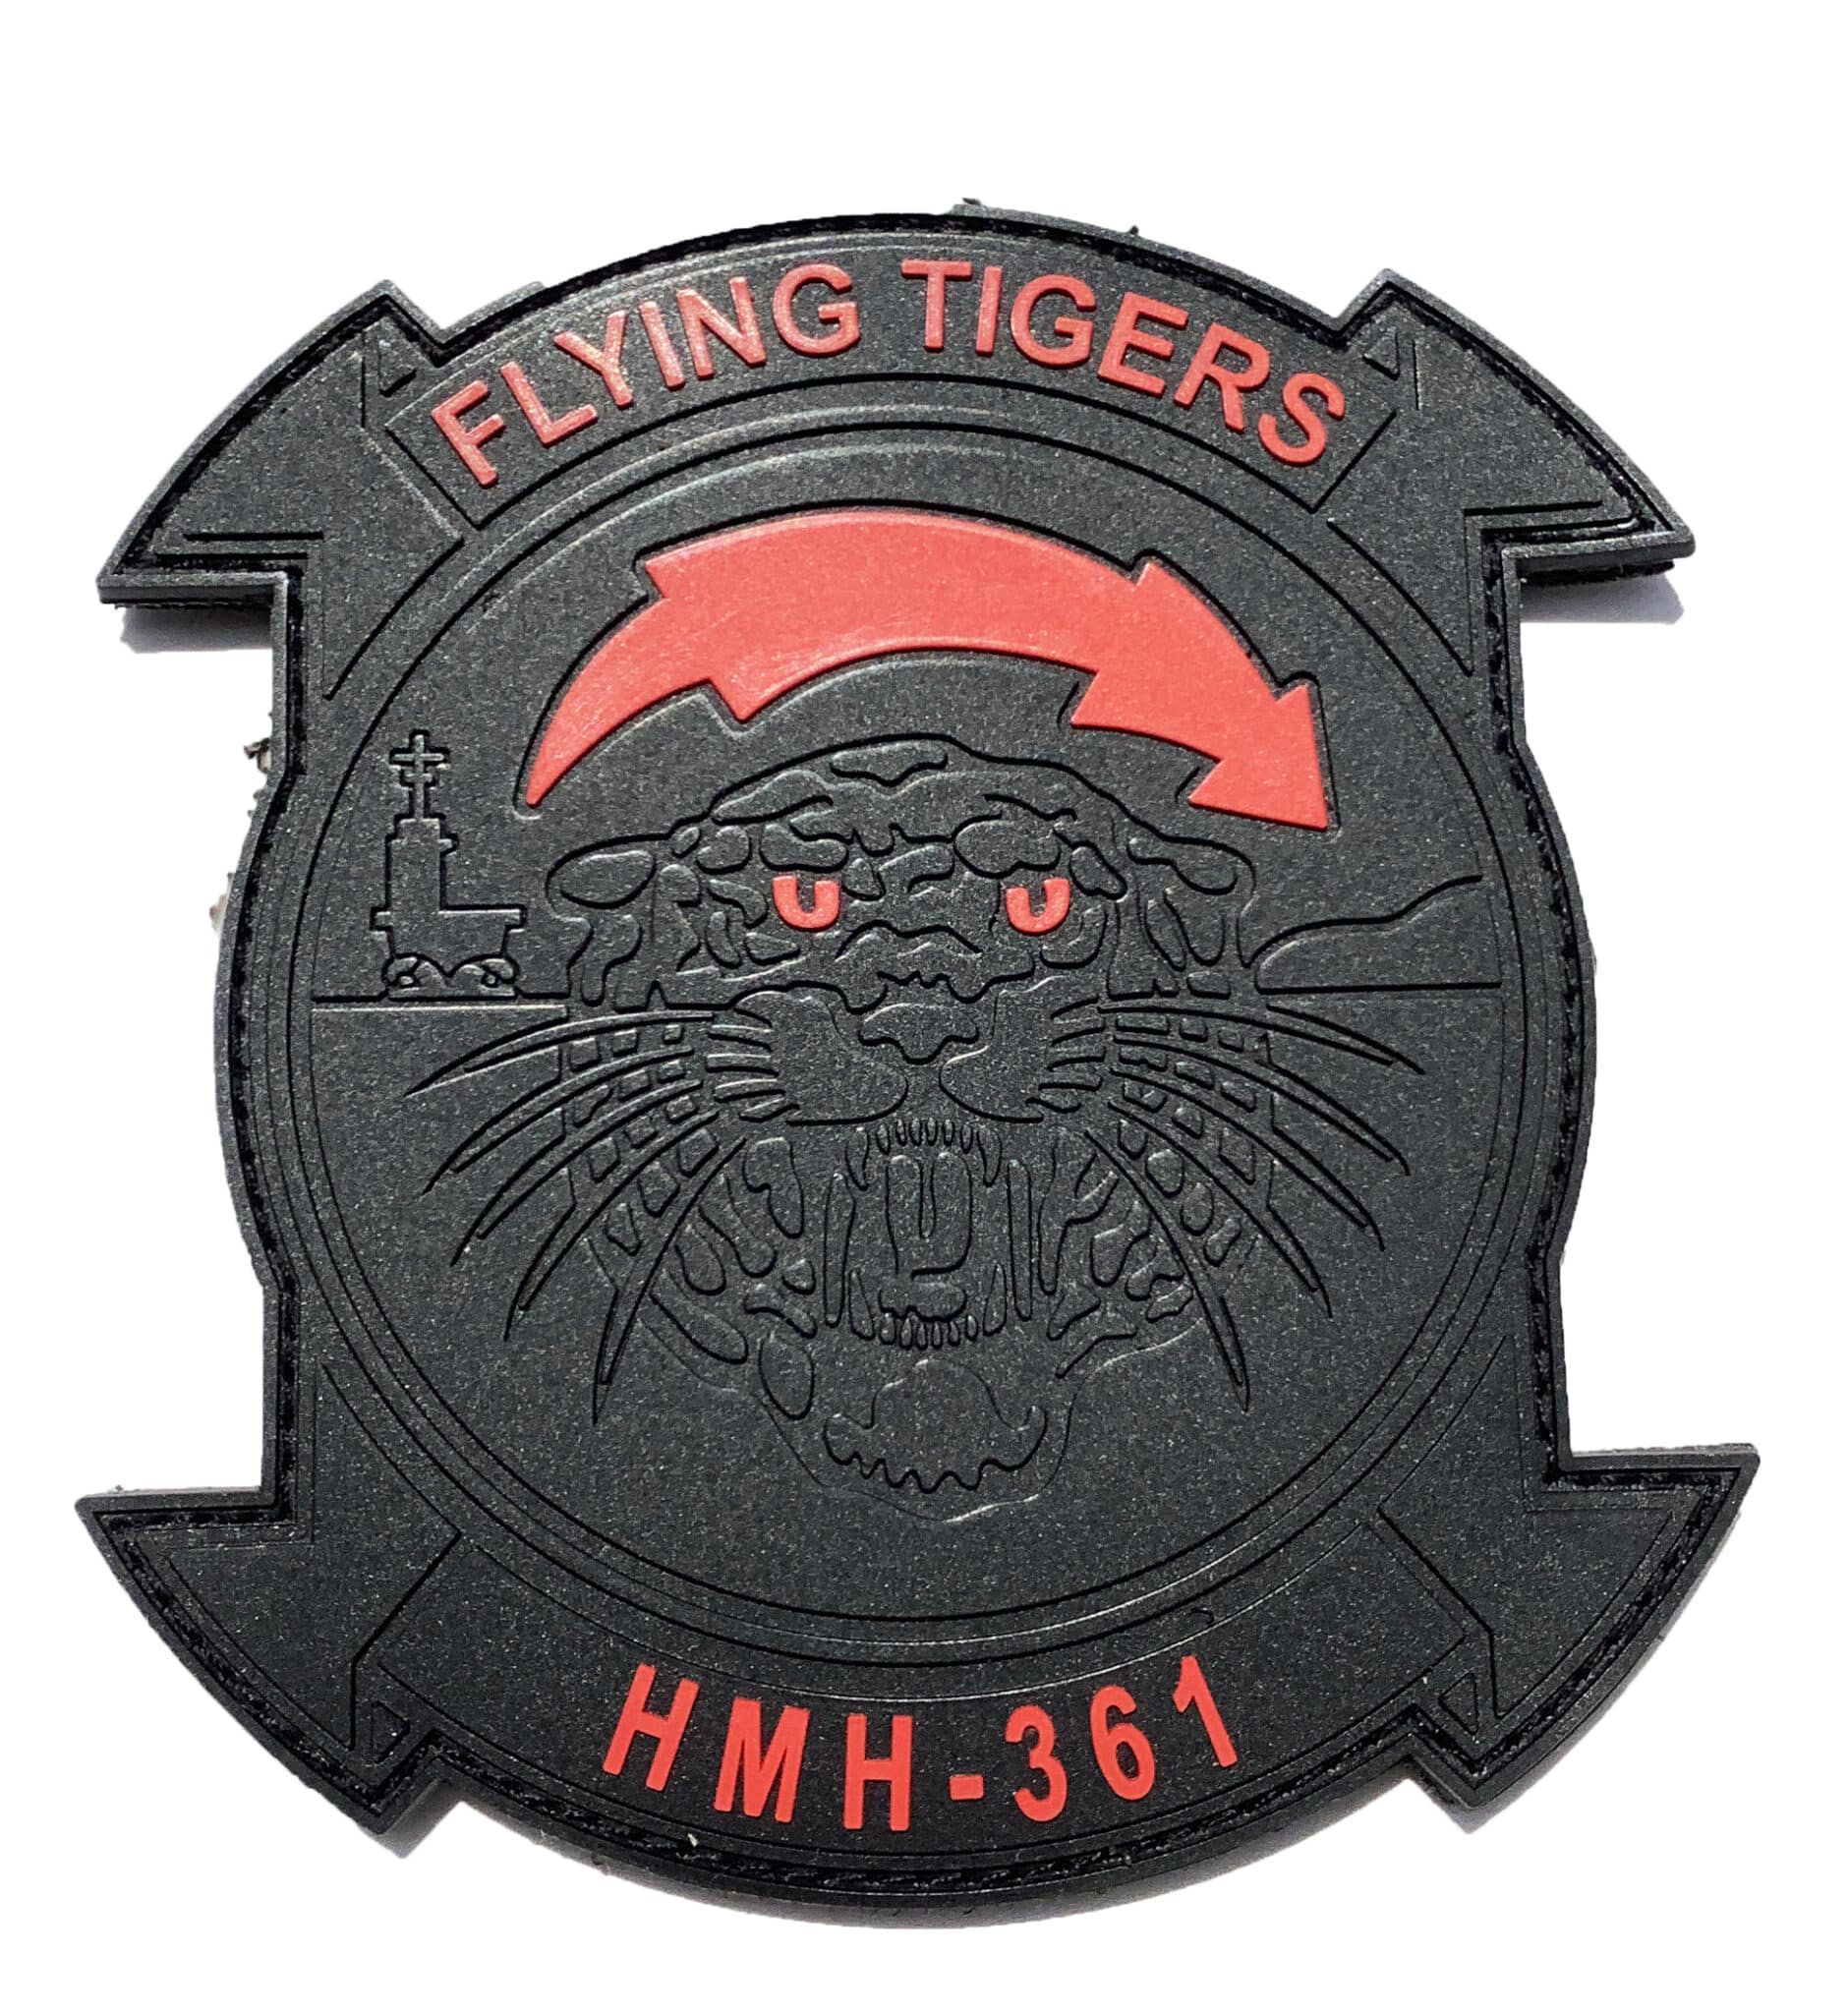 HMH-361 Flying Tigers Blackout PVC patch - Hook and Loop